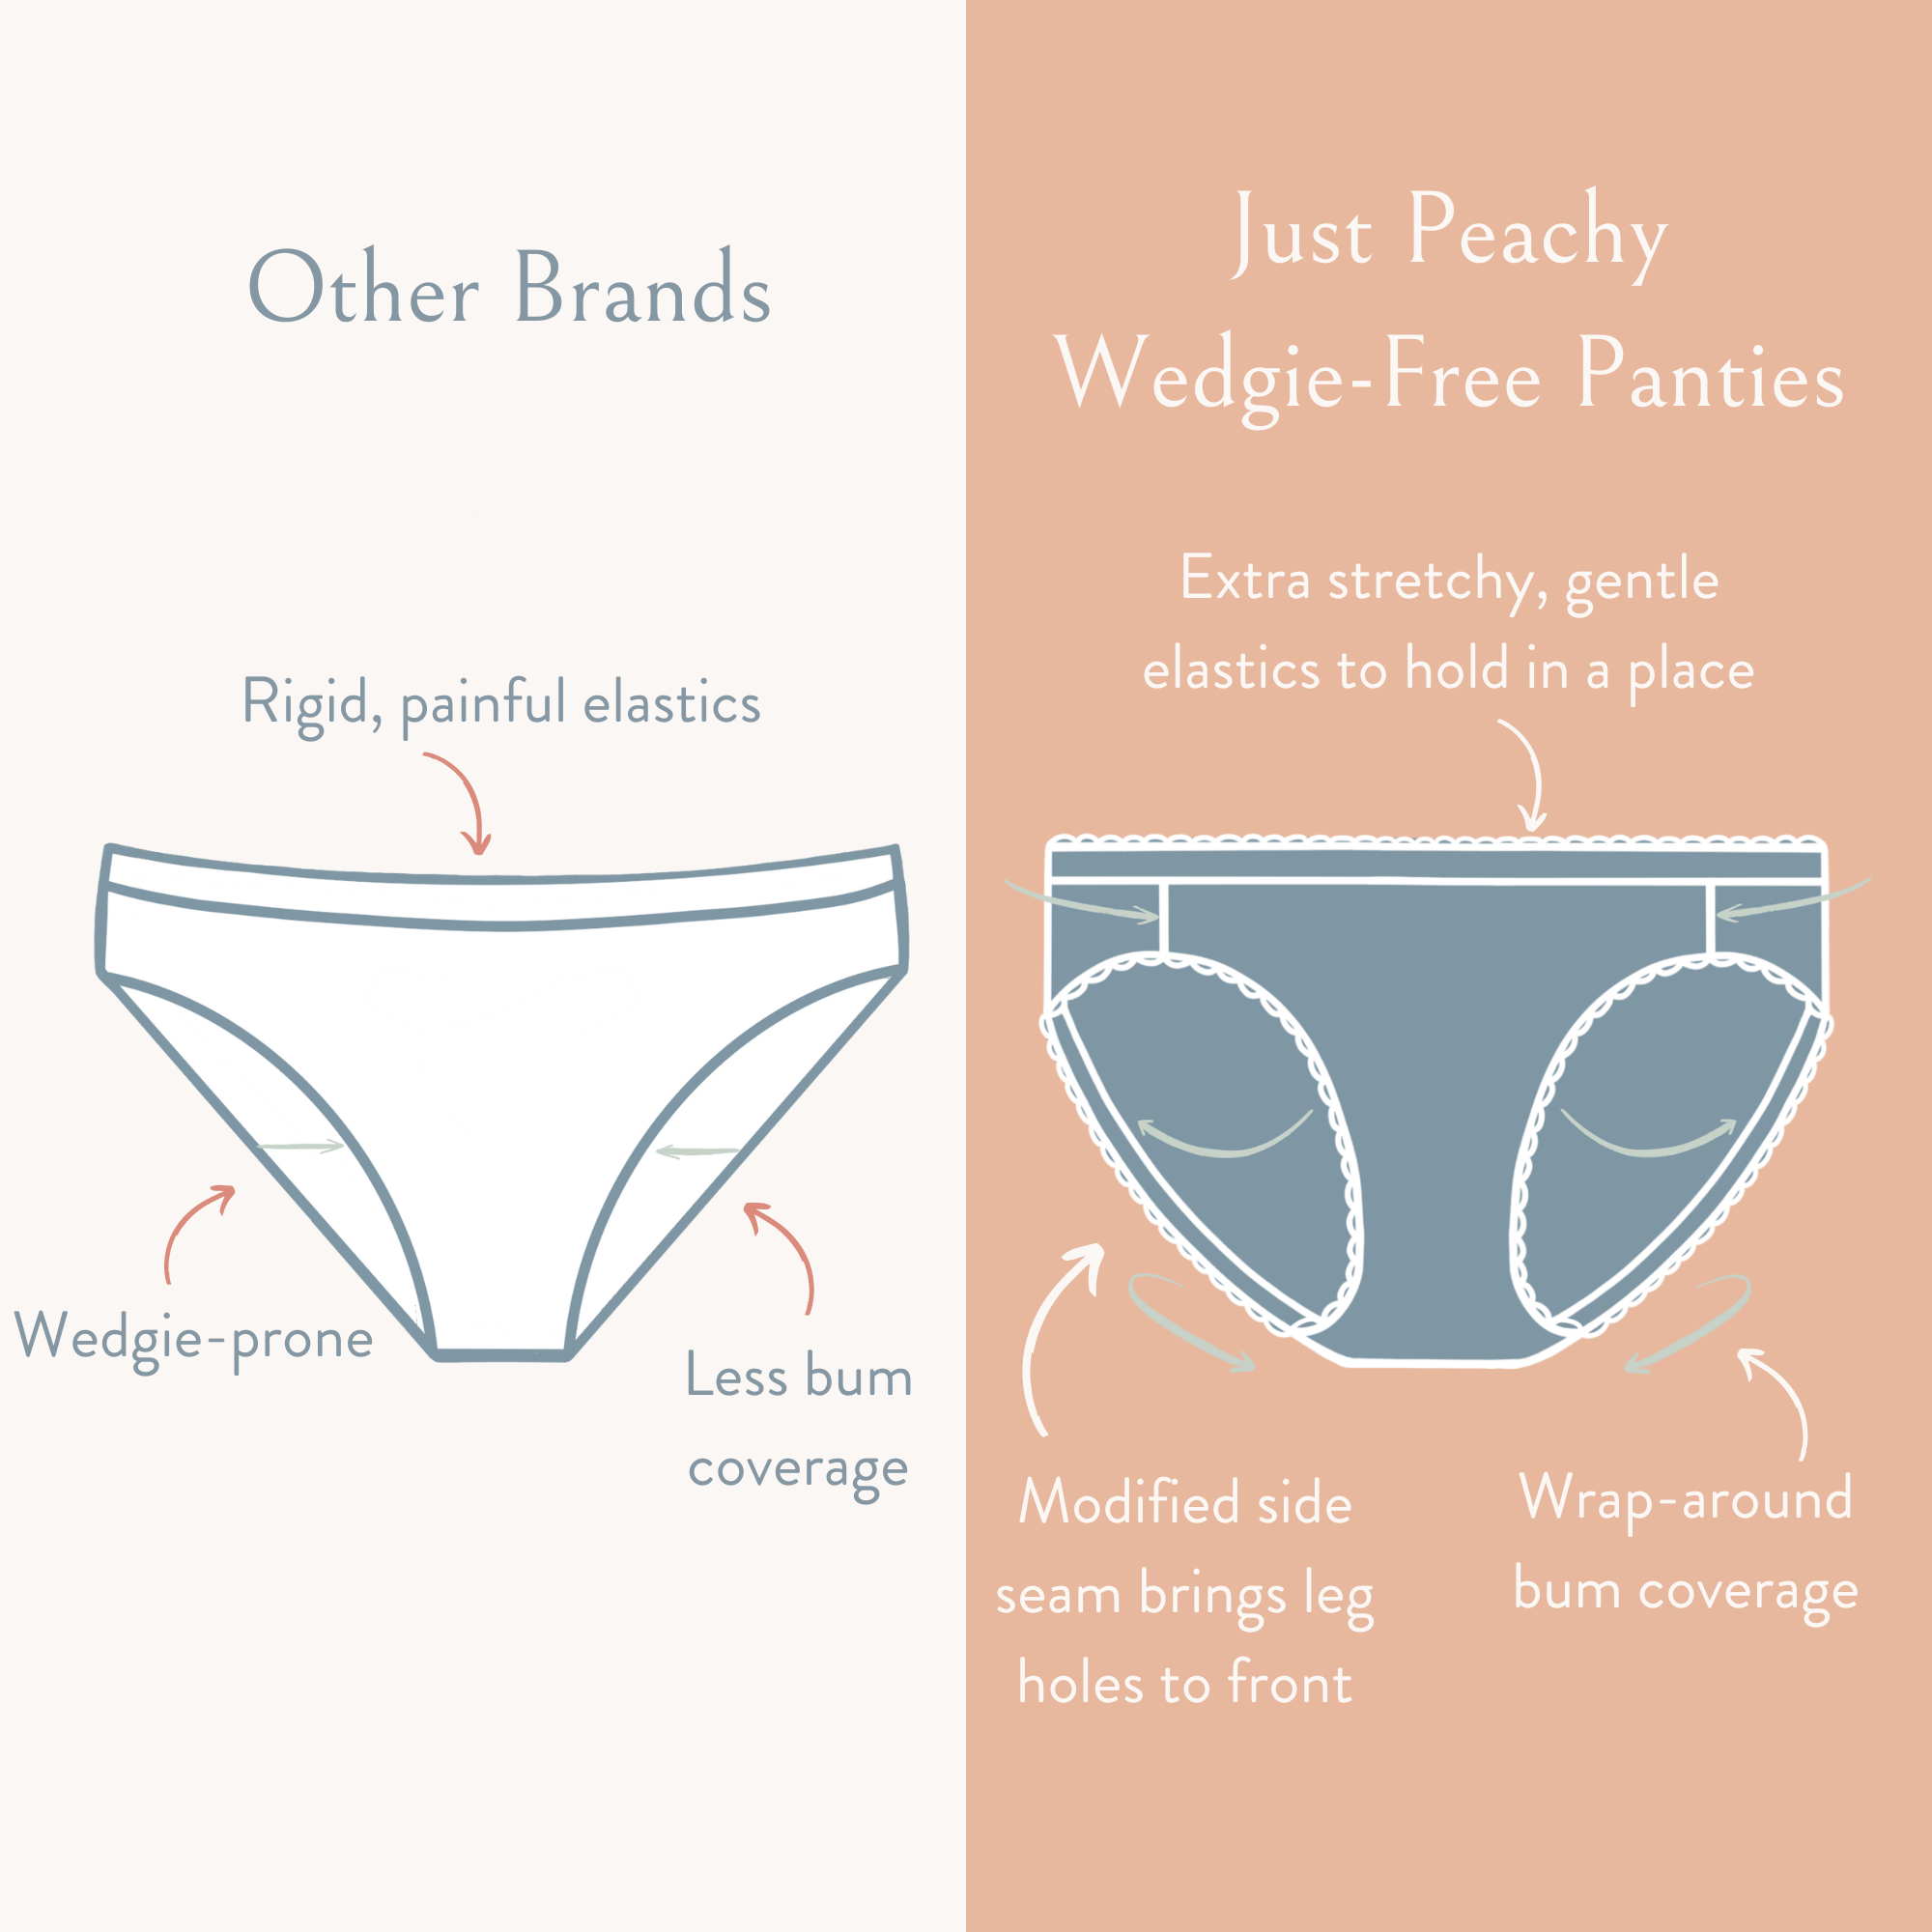 Unlike other brands, the modified side seams bring the leg holes to the front and wrap around the bum for increased coverage. Other brands are wedgie-prone, our new Wedgie-Free panties ensure that wedgies become a thing of the past.